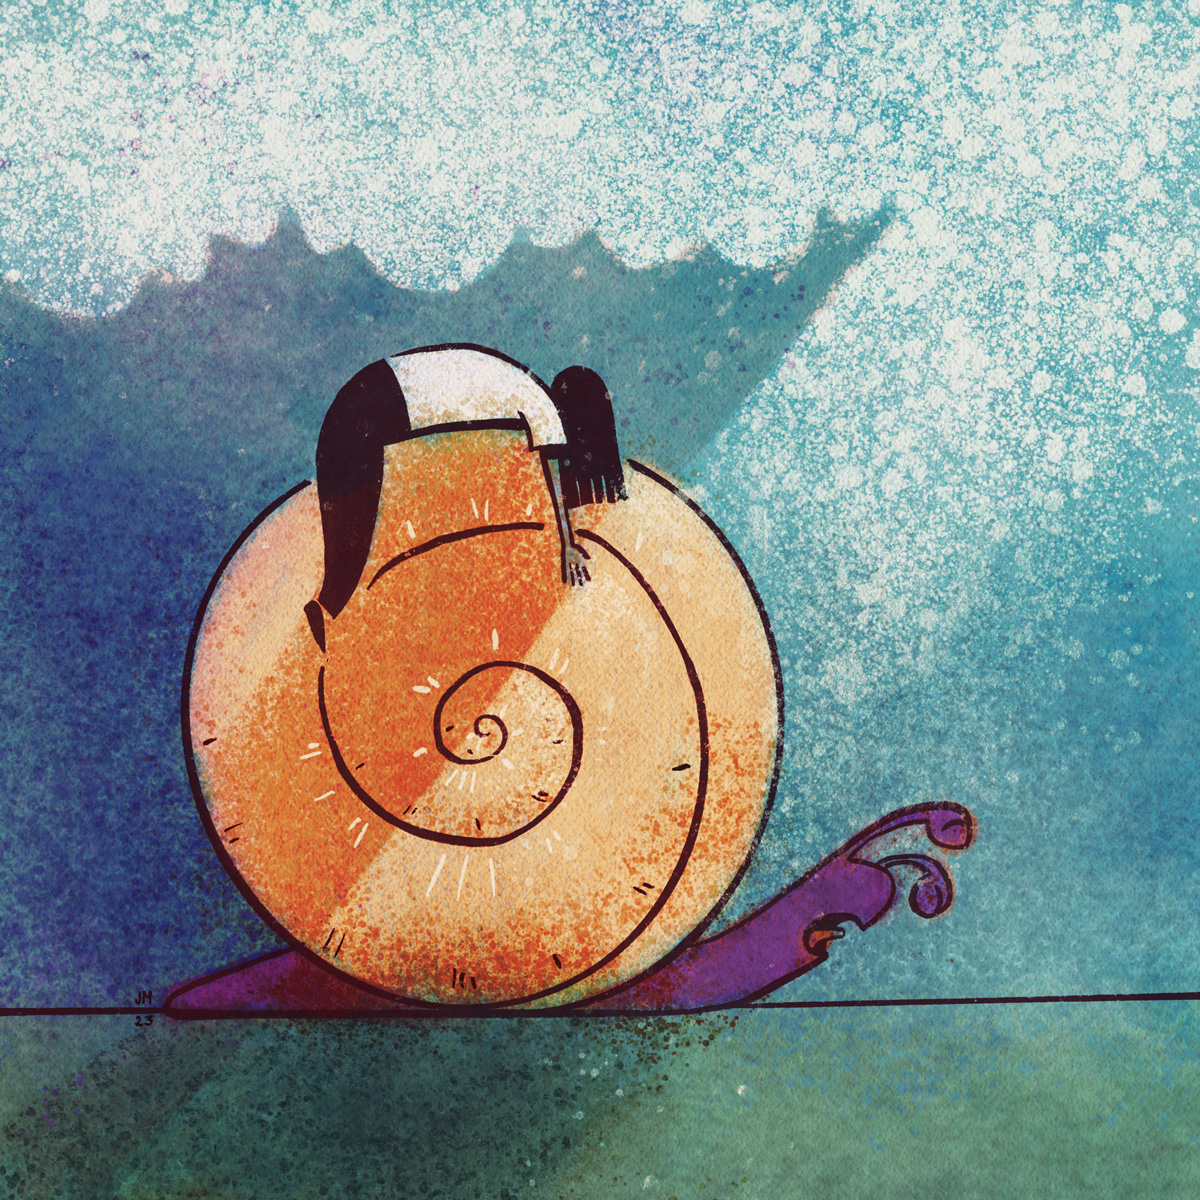 Illustration of psychomotor retardation depicted as a woman riding a snail